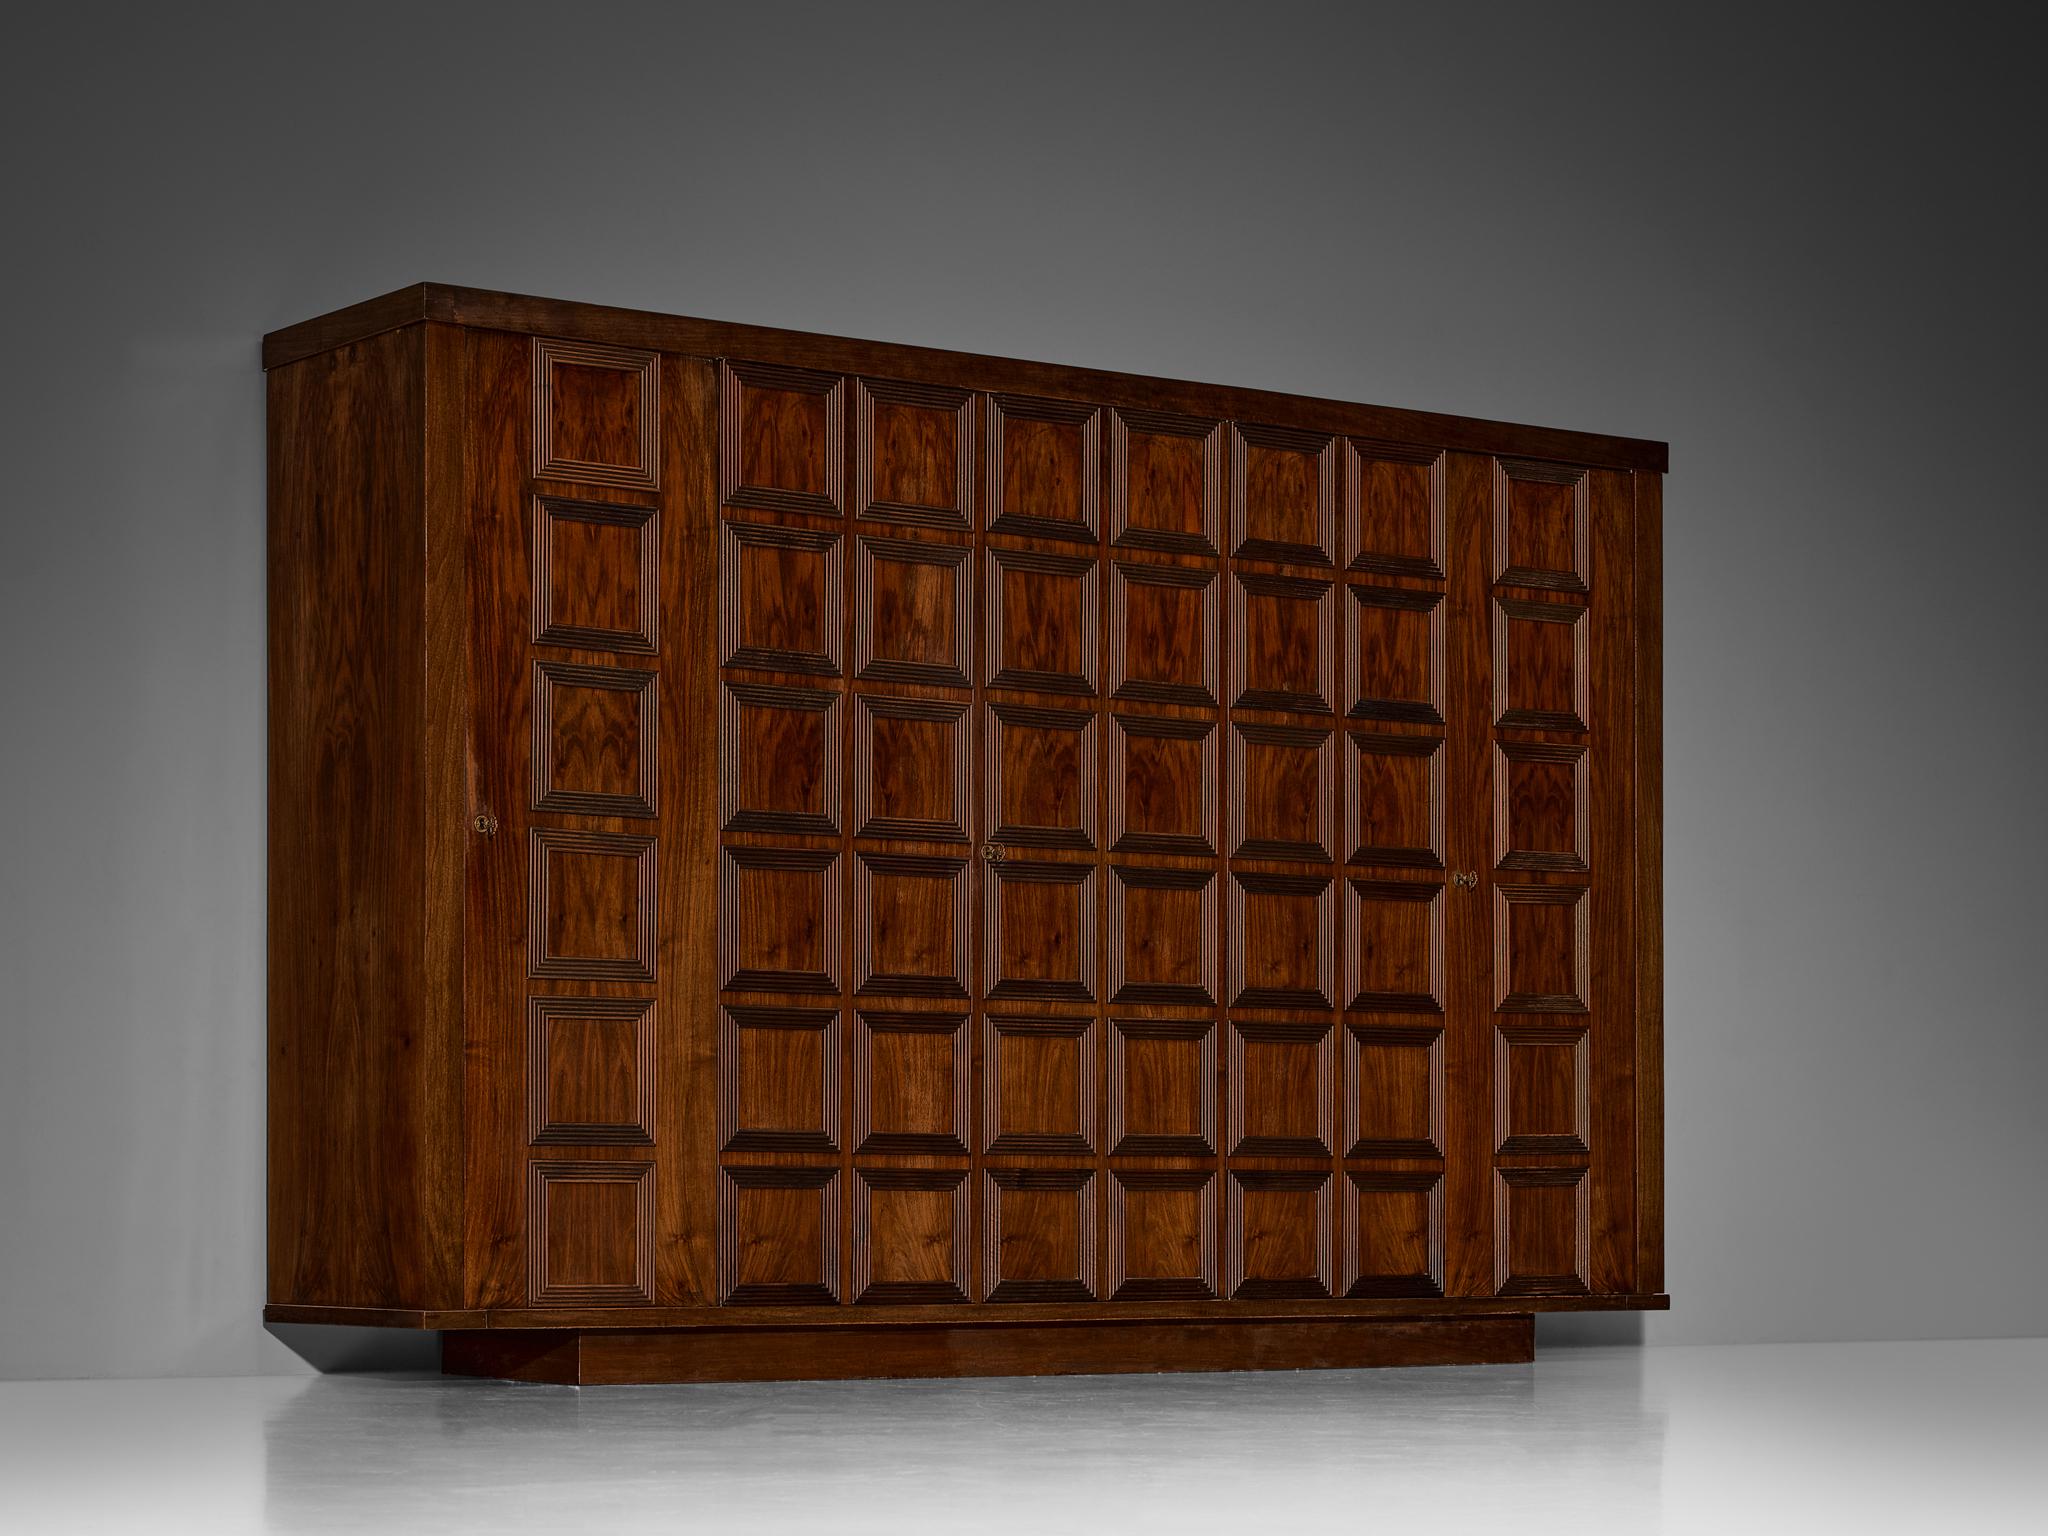 Wardrobe or highboard, walnut, wood, Italy, 1940s 

This stunning wardrobe is based on a well-designed structure where aesthetics and functionally come hand in hand.  Made in Italy in the Art Deco period, this piece displays a clear and sturdy